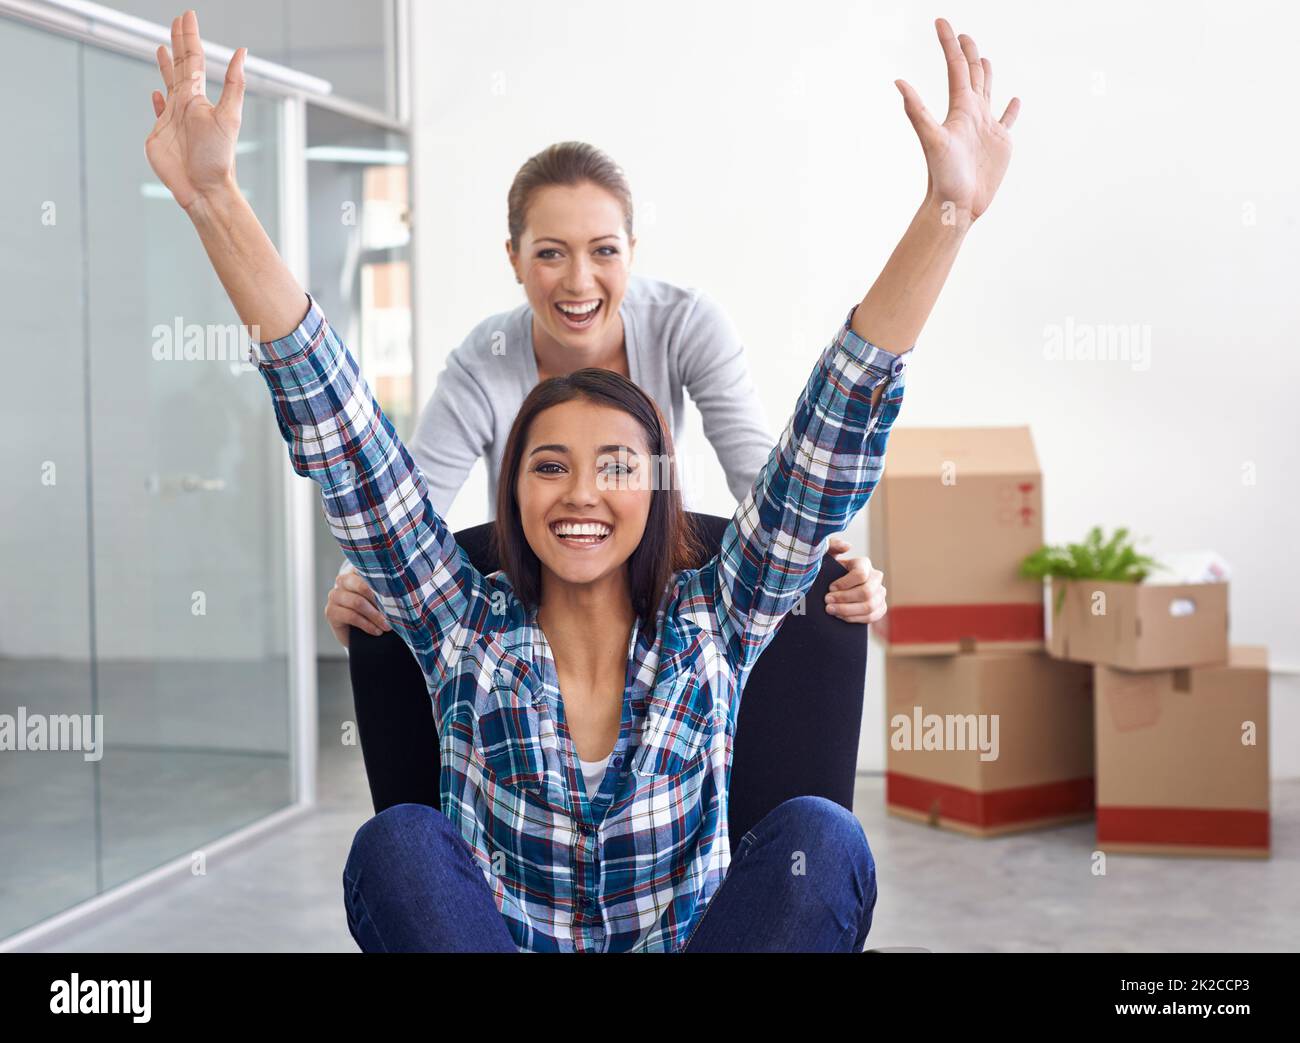 Fooling around in an empty office. Shot of two female entrepreneurs moving into a new office. Stock Photo